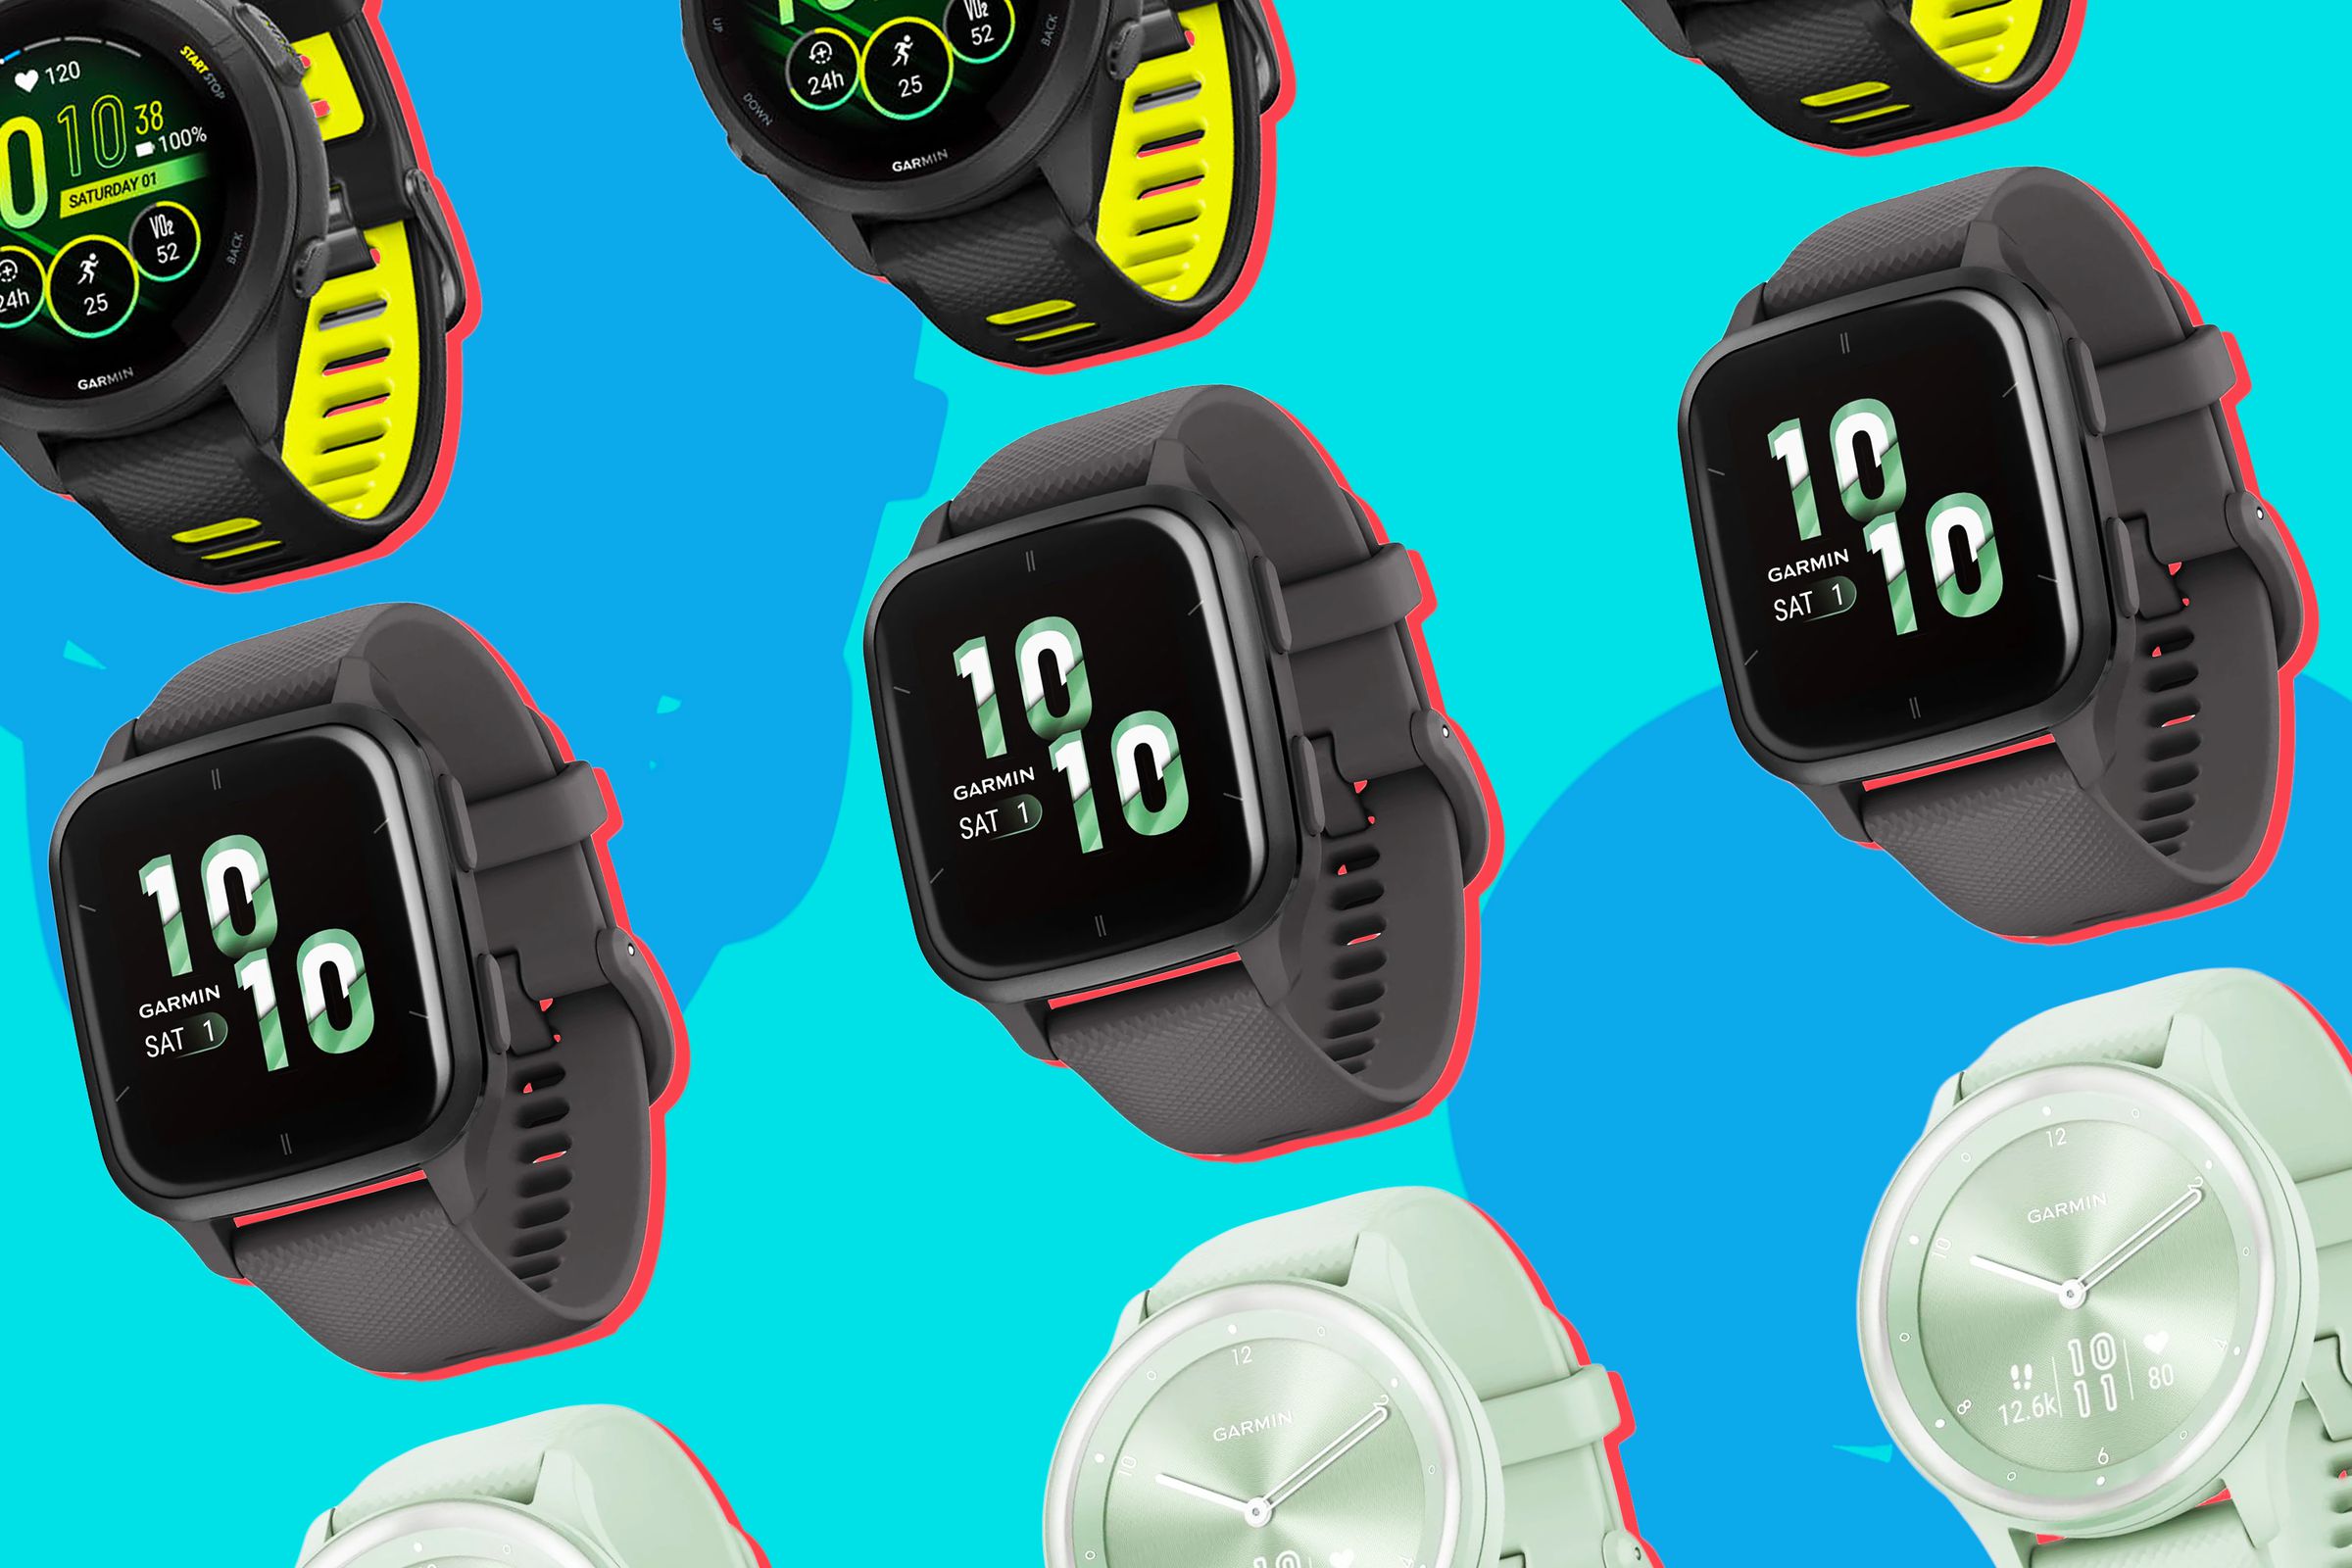 Several Garmin watches on a colorful background